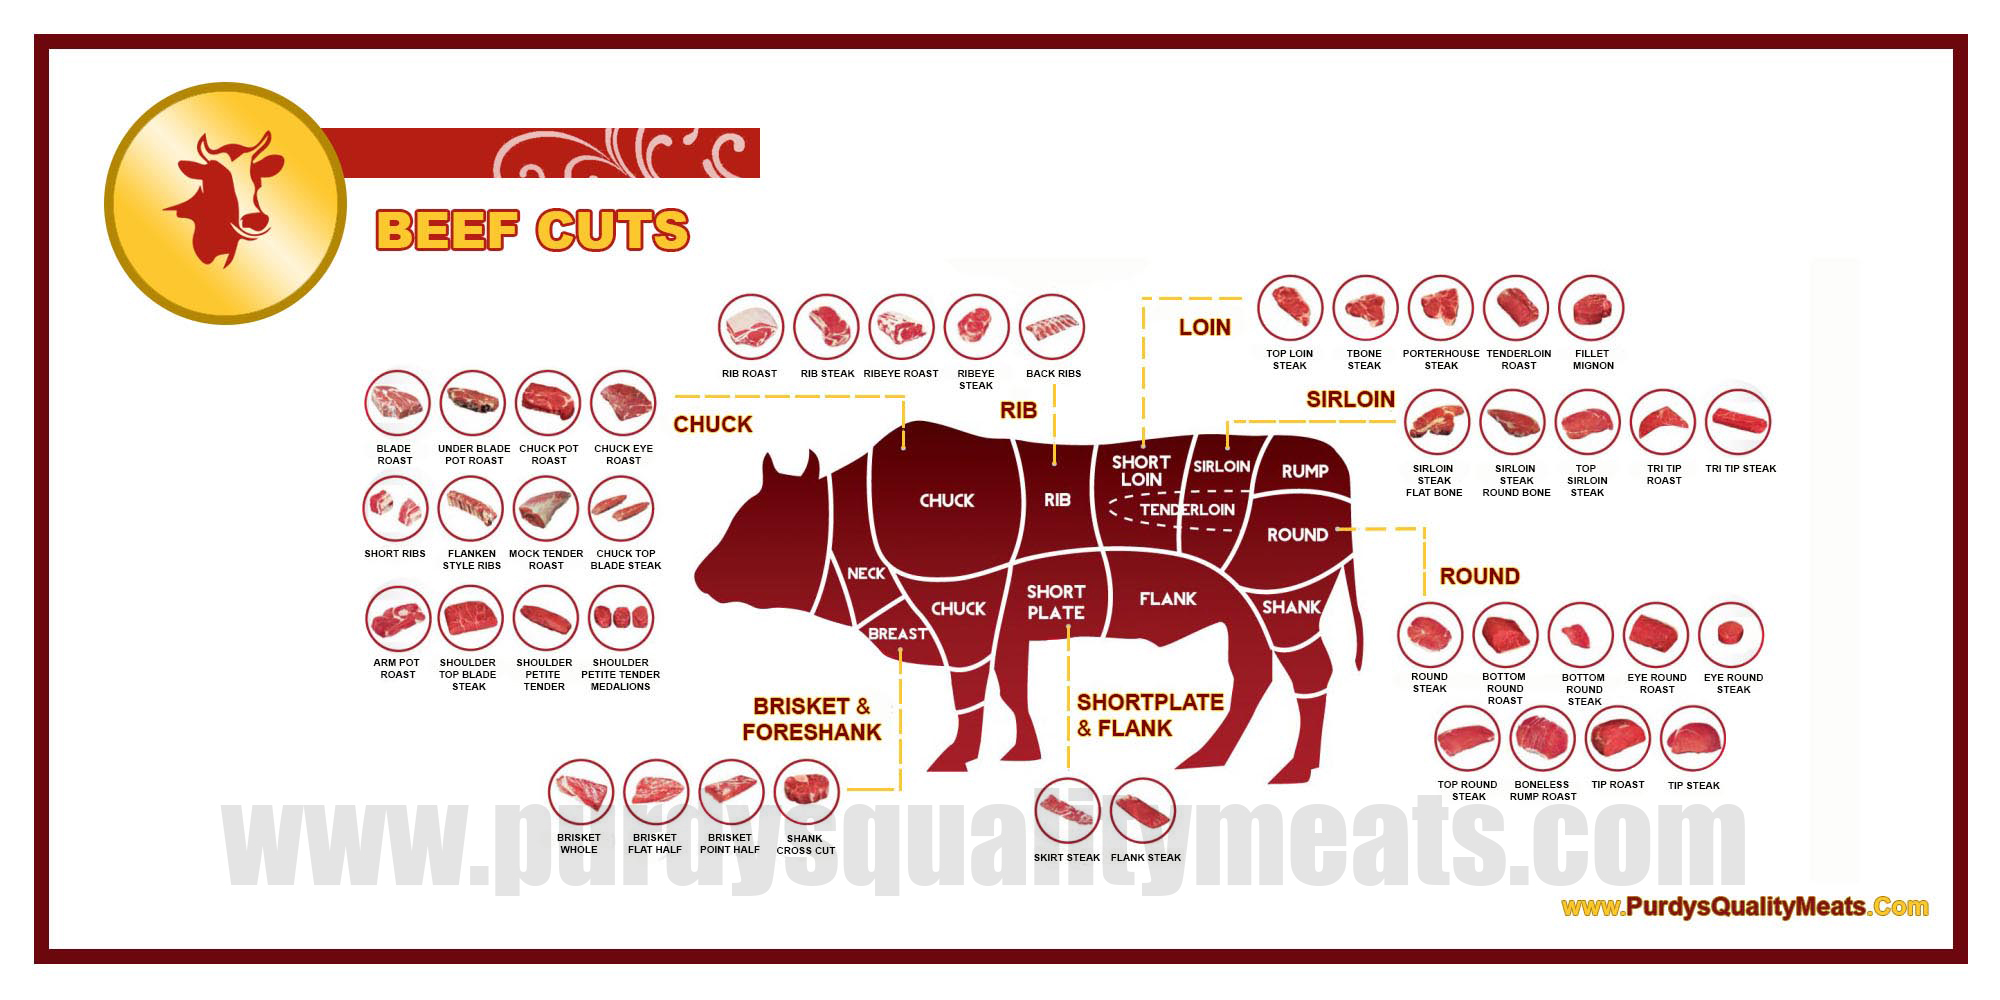 This image icon displays the Purdy's Quality Meats Beef Cuts image